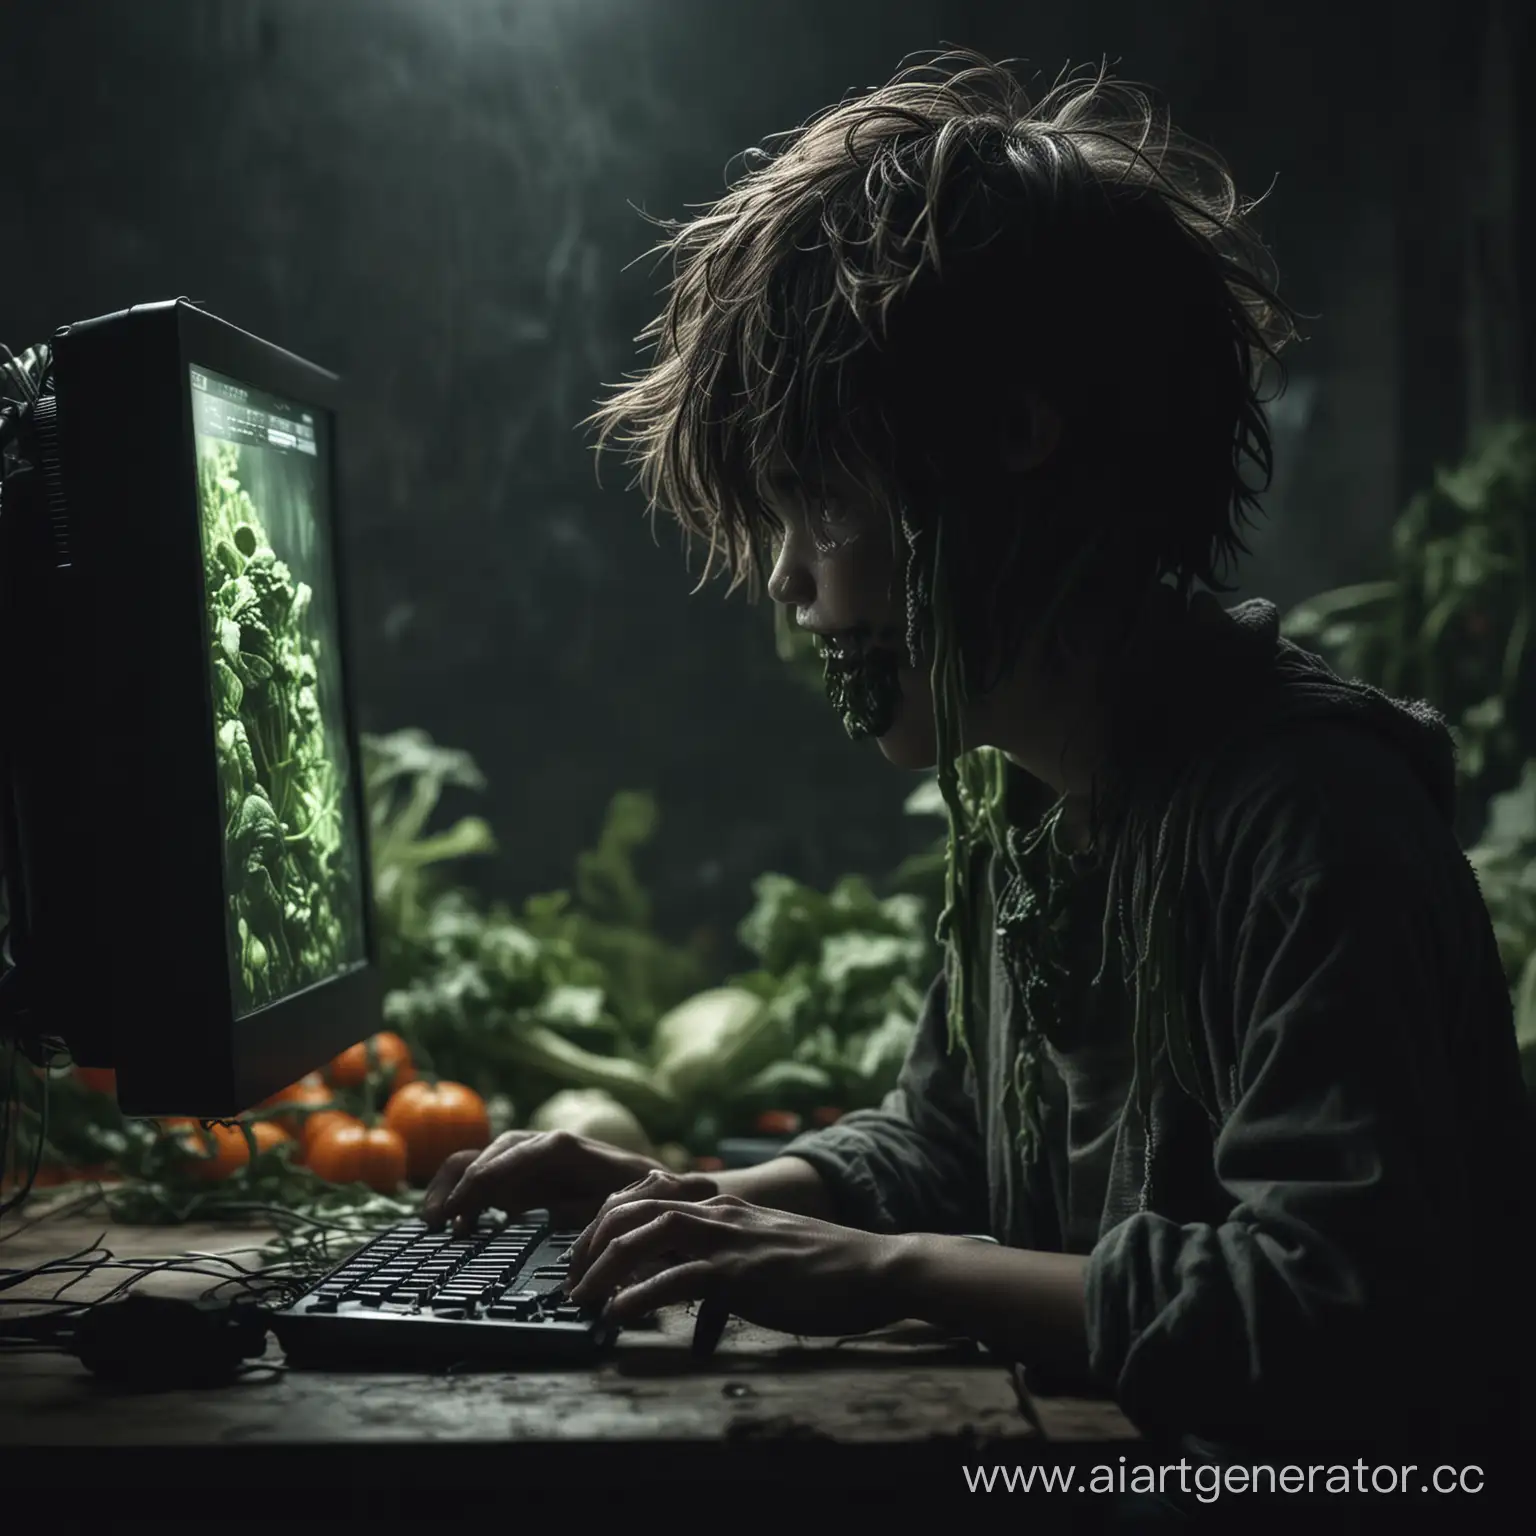 Dark-Transformation-Boy-Becomes-Mutant-While-Using-Computer